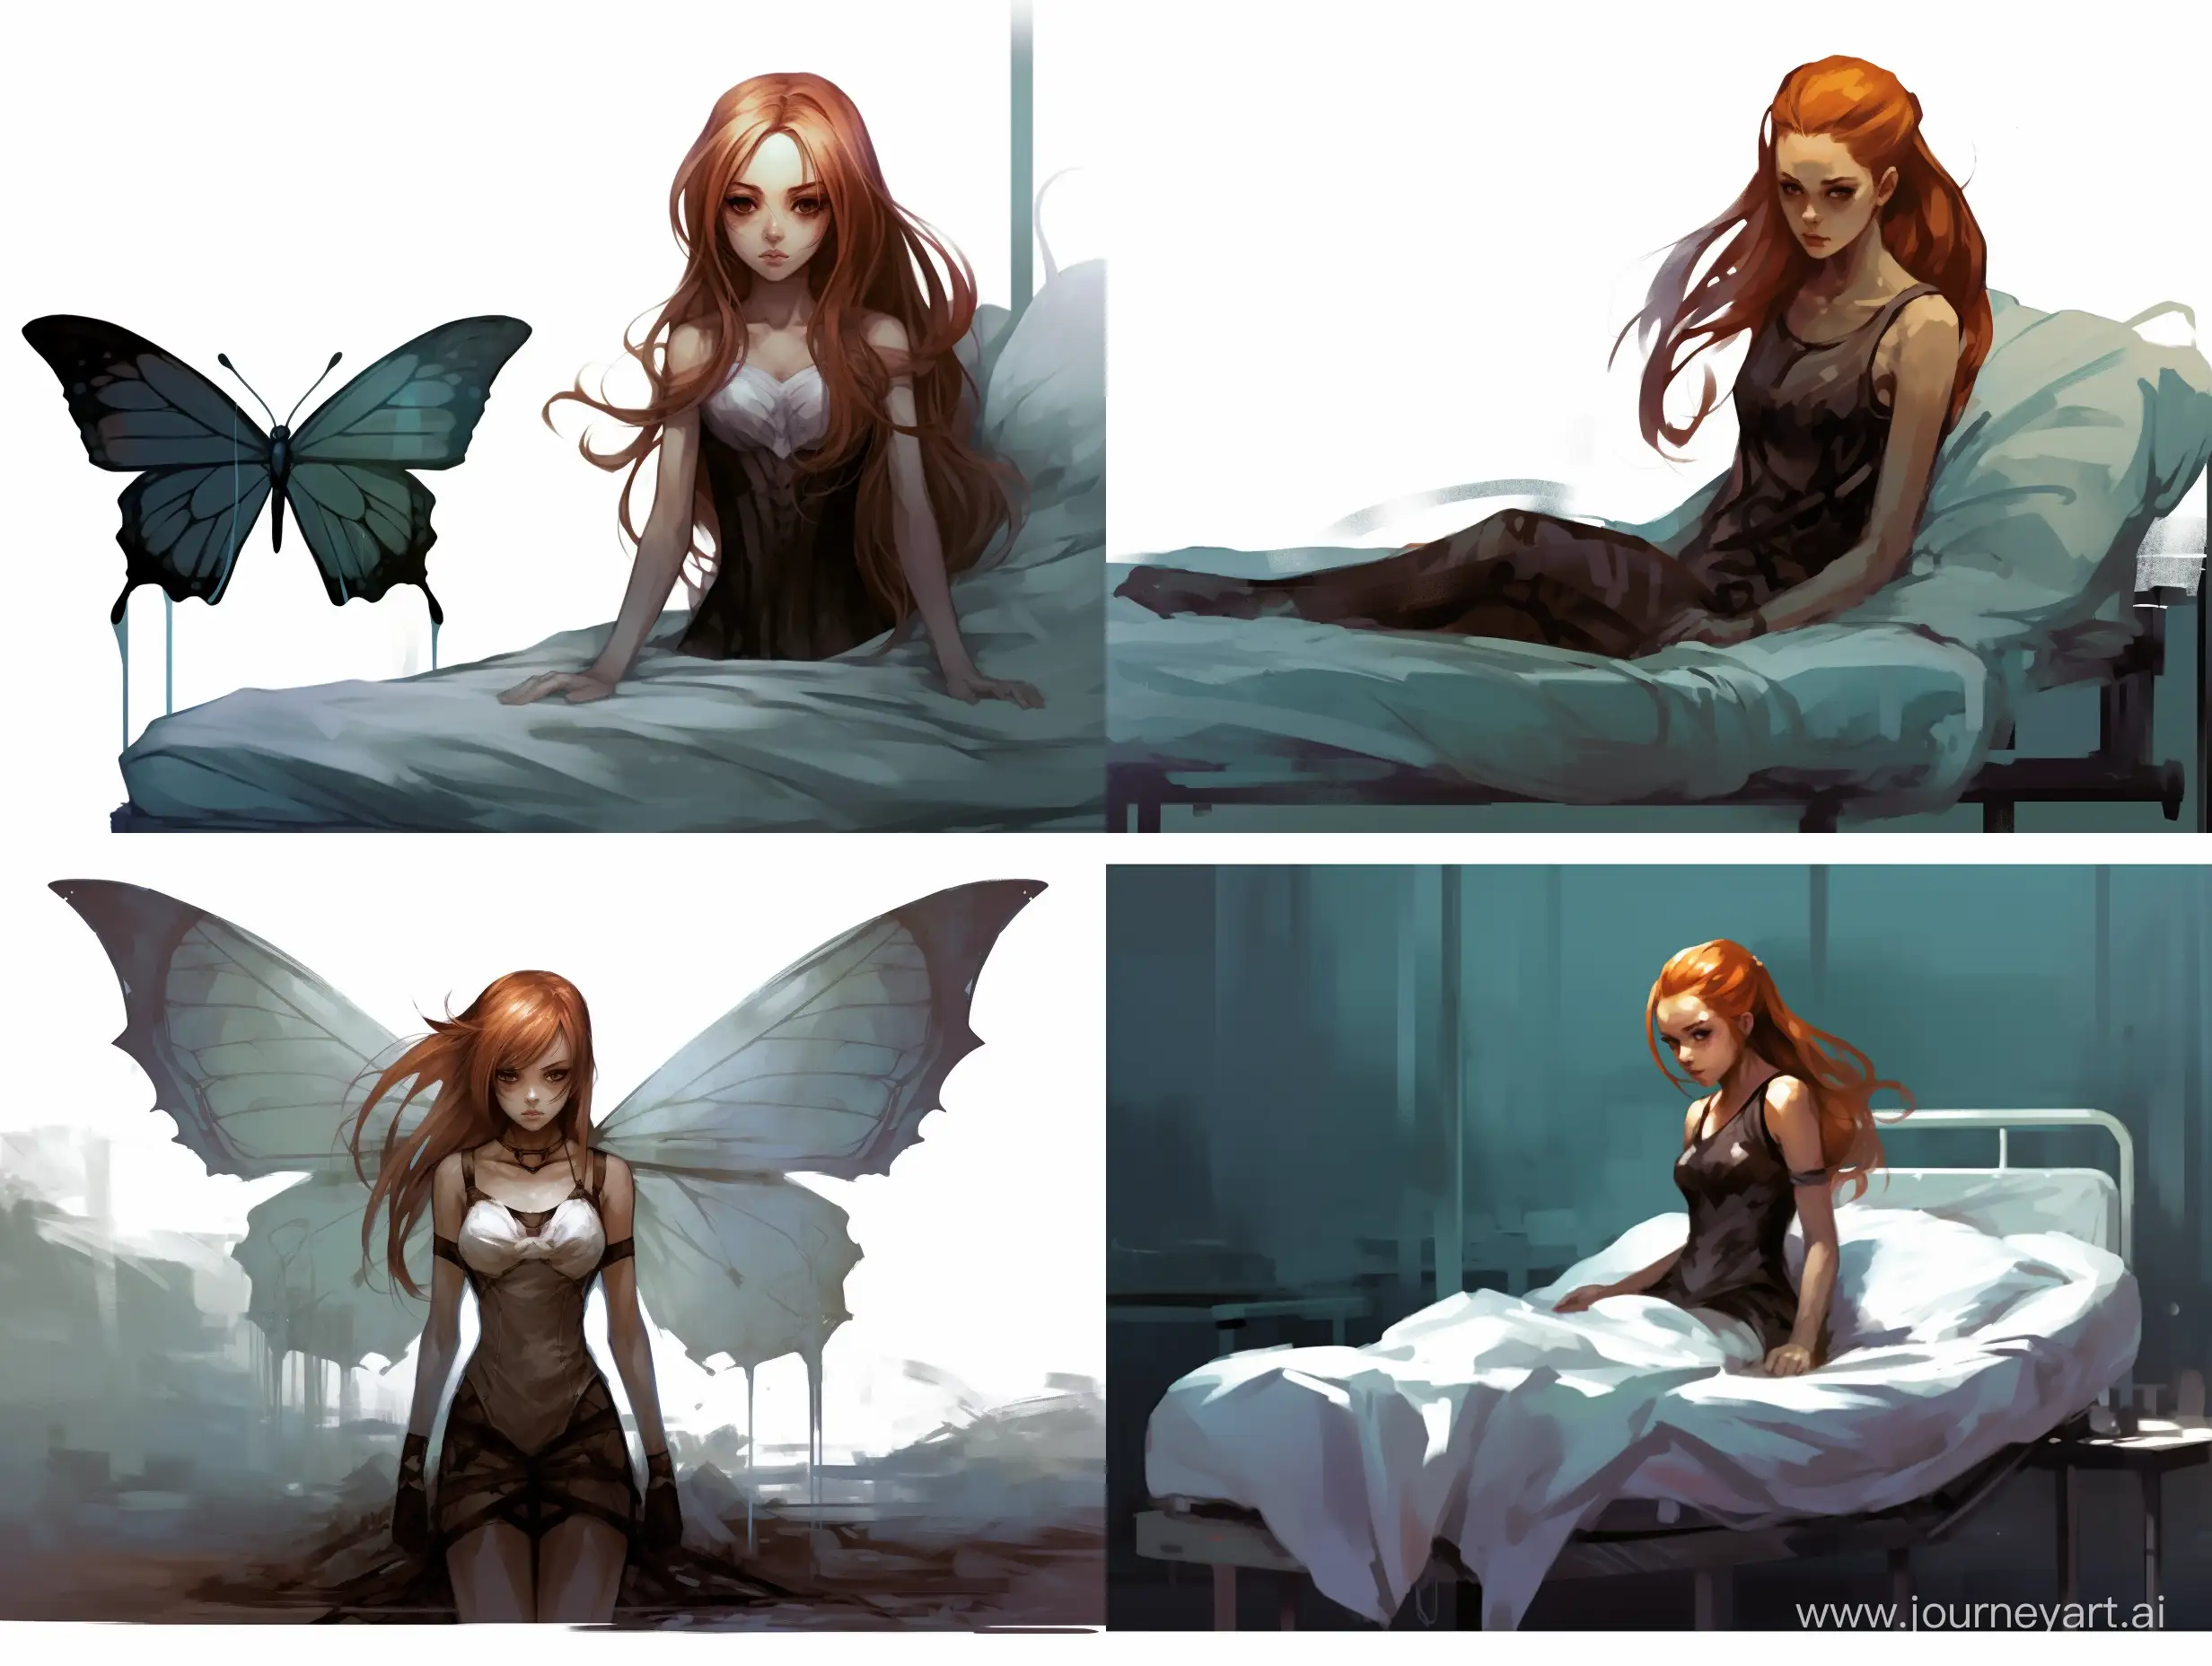 Vulnerable-Ginger-Female-HalfButterfly-Mutant-Rests-in-Hospital-Bed-Concept-Art